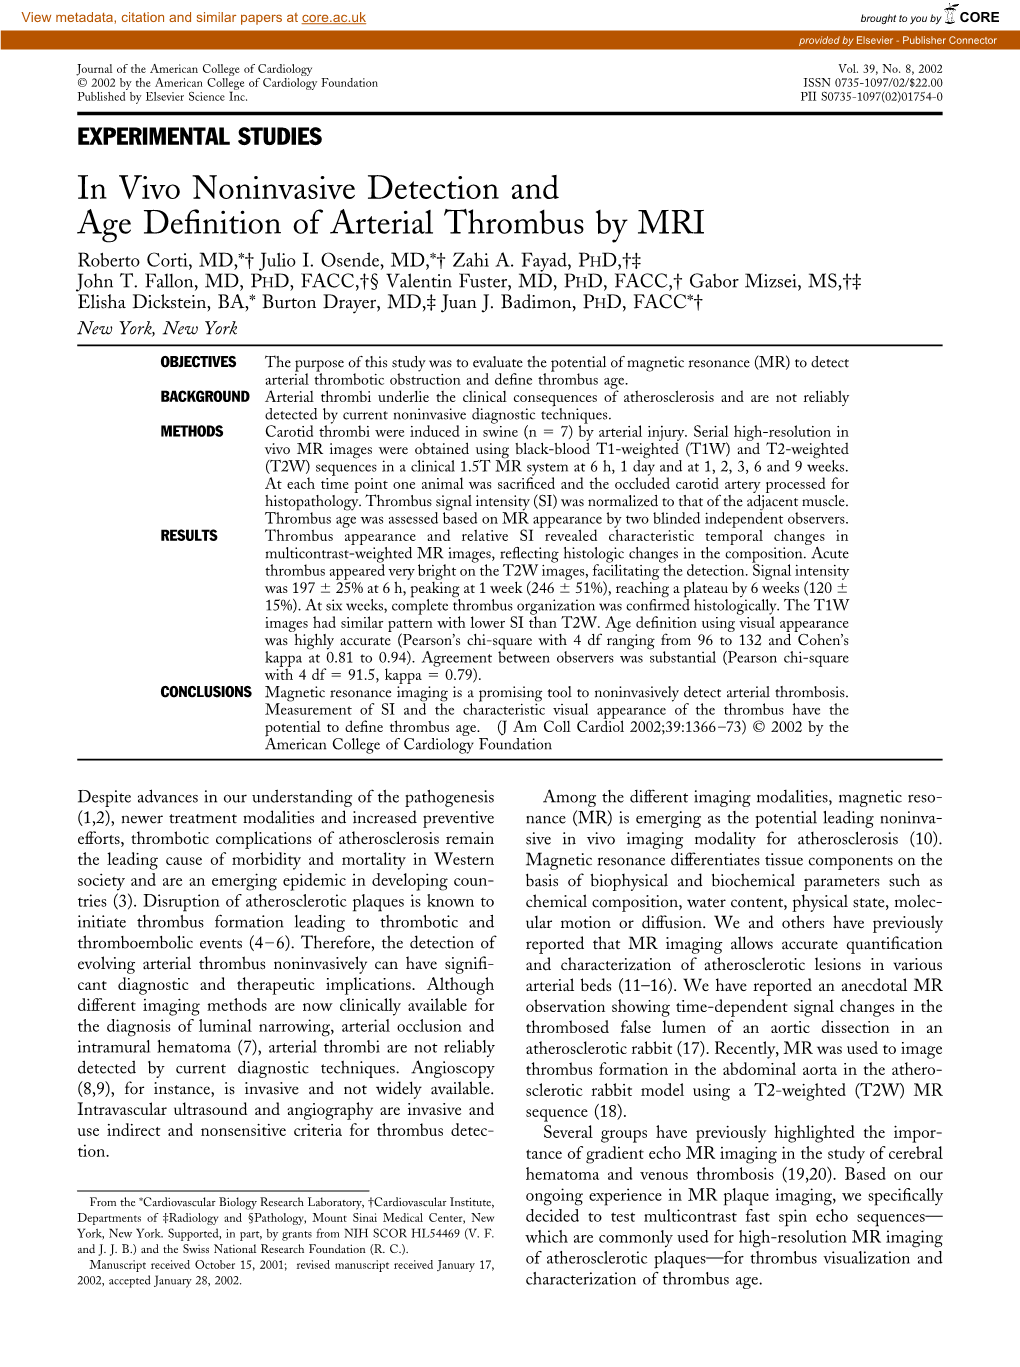 In Vivo Noninvasive Detection and Age Definition of Arterial Thrombus By